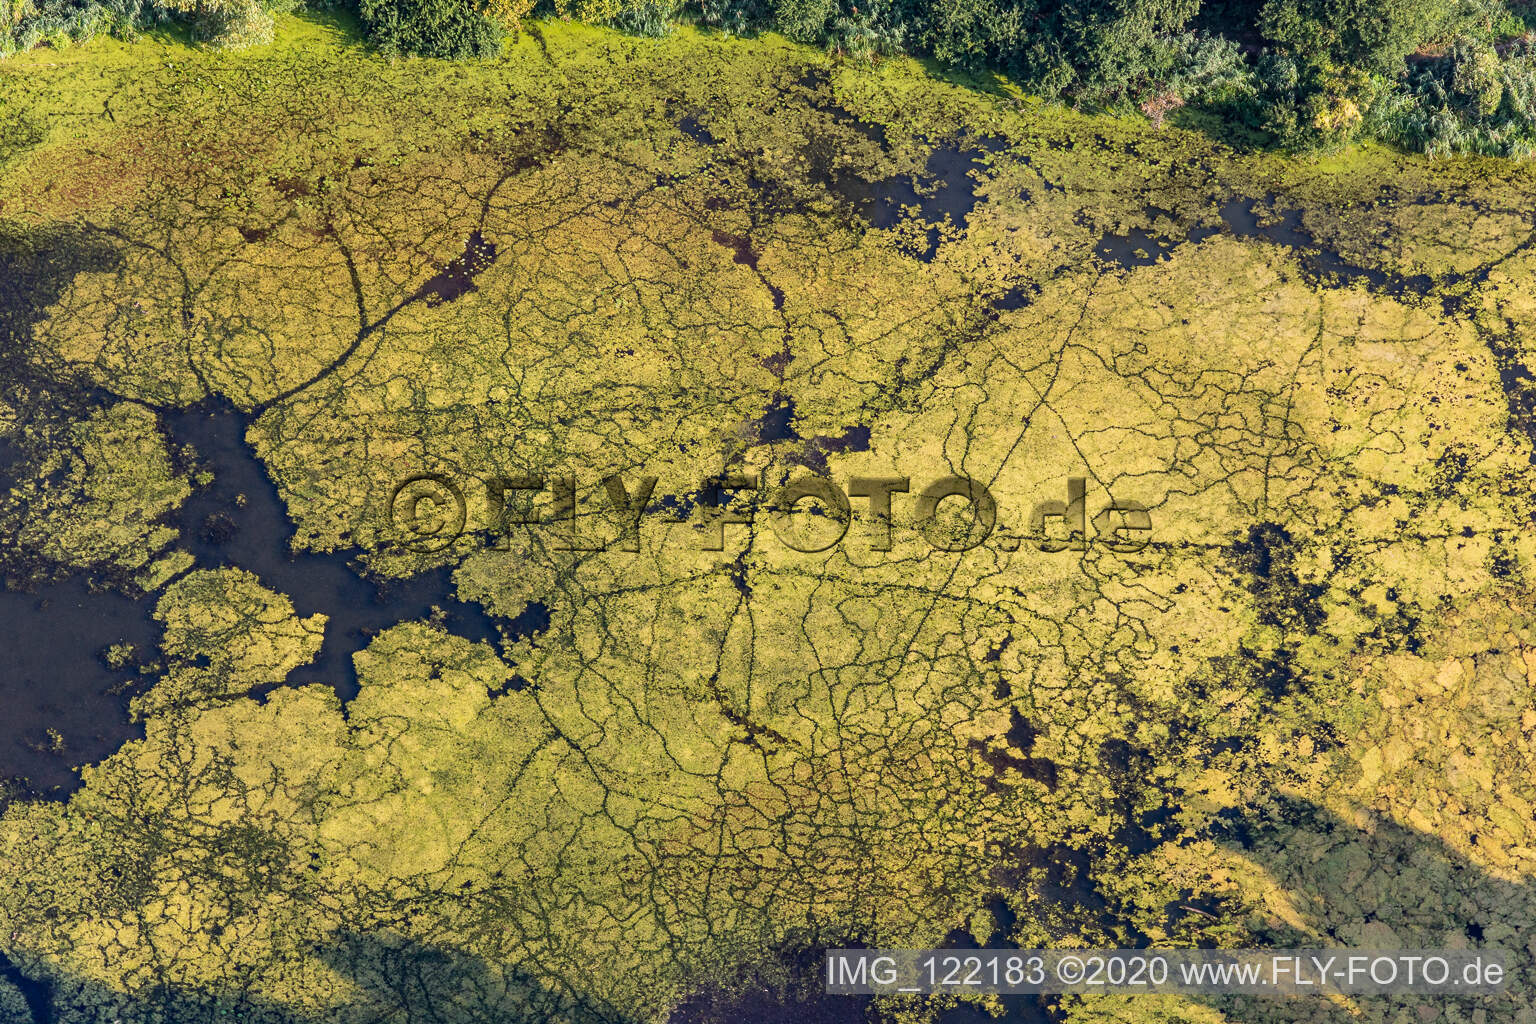 Duckweed on the fish mark in Leimersheim in the state Rhineland-Palatinate, Germany